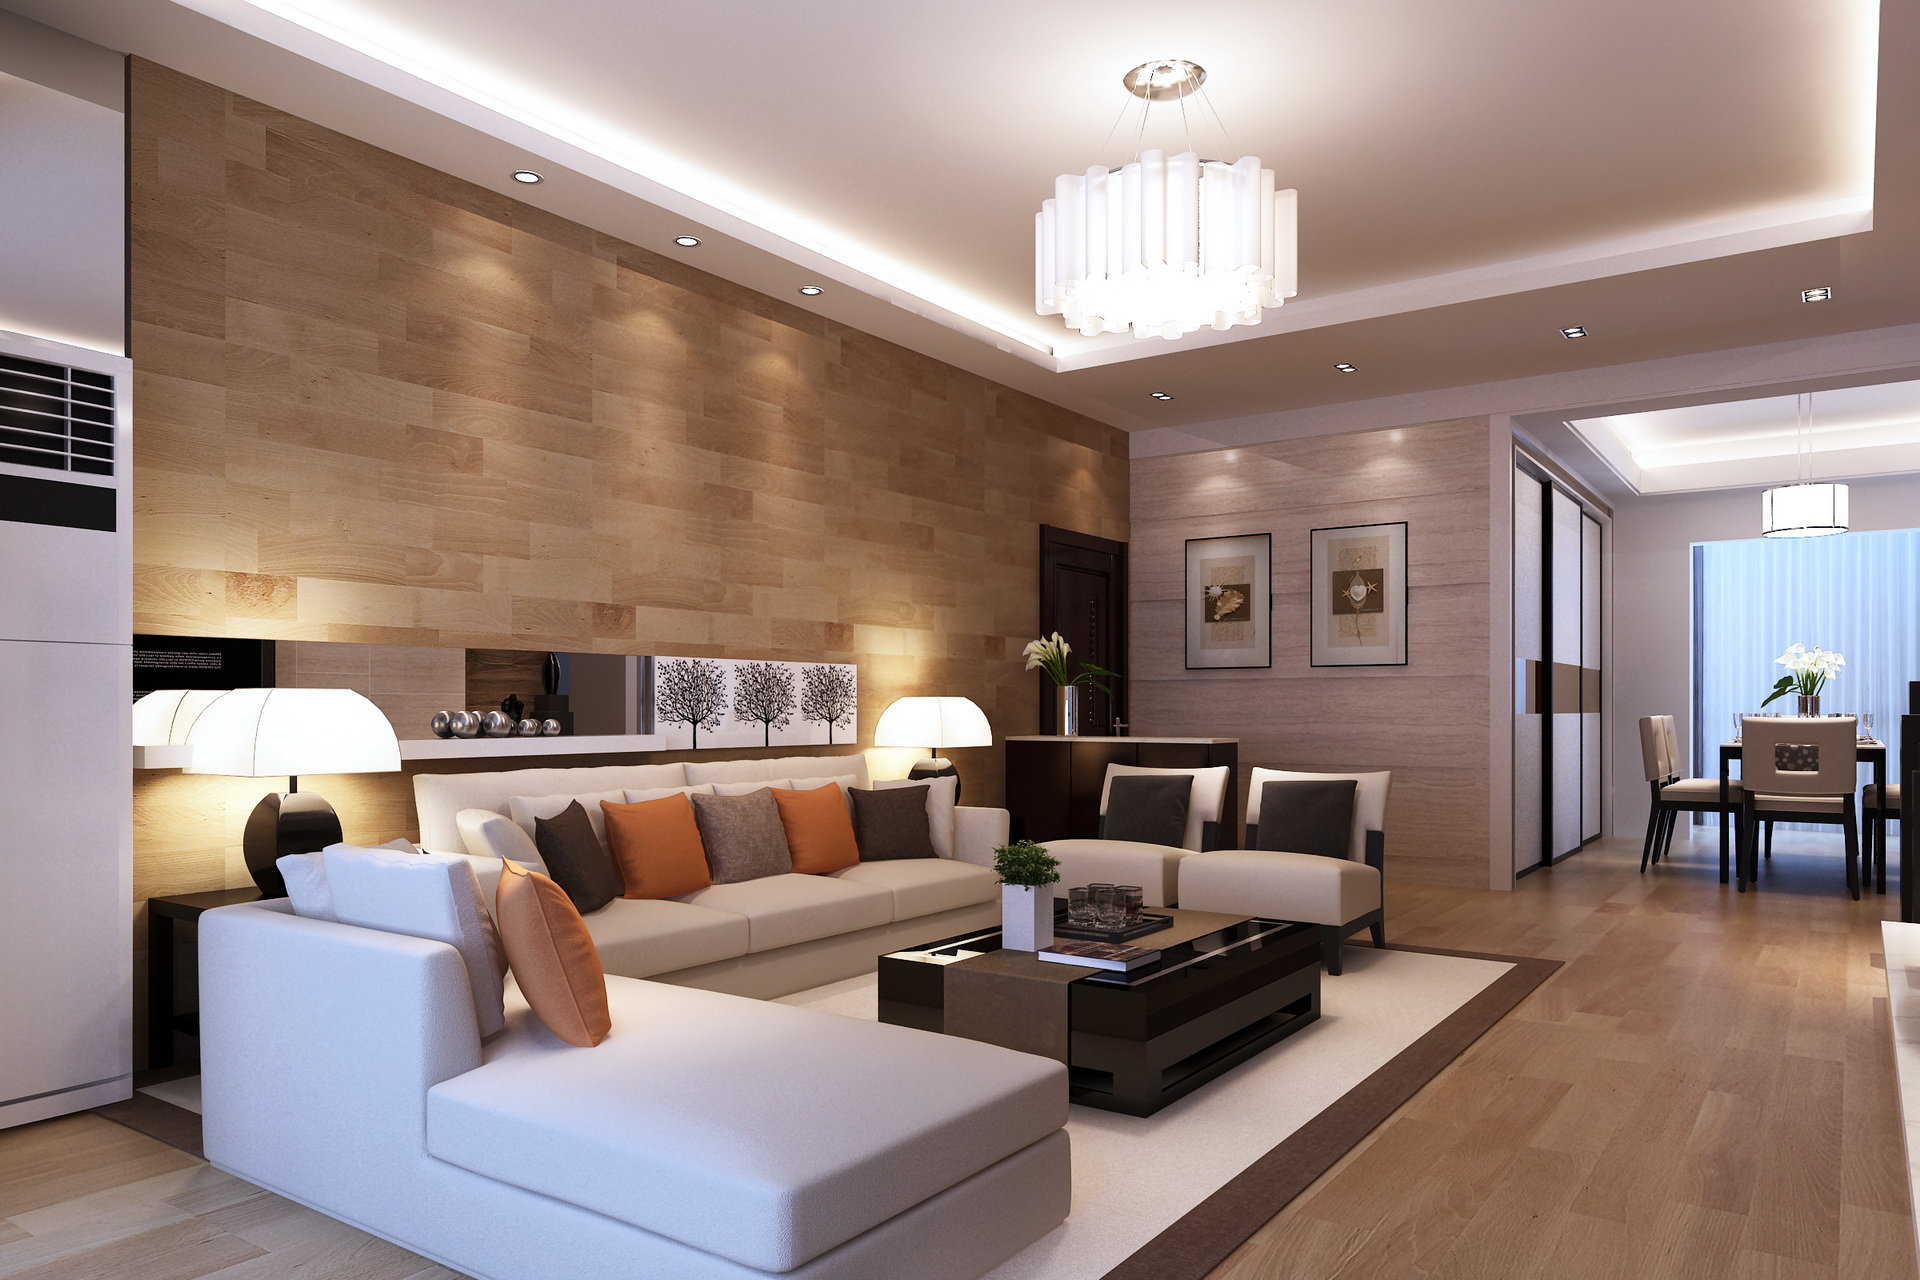 Living room ideas – 38 decorating tips to improve the appearance of your living area